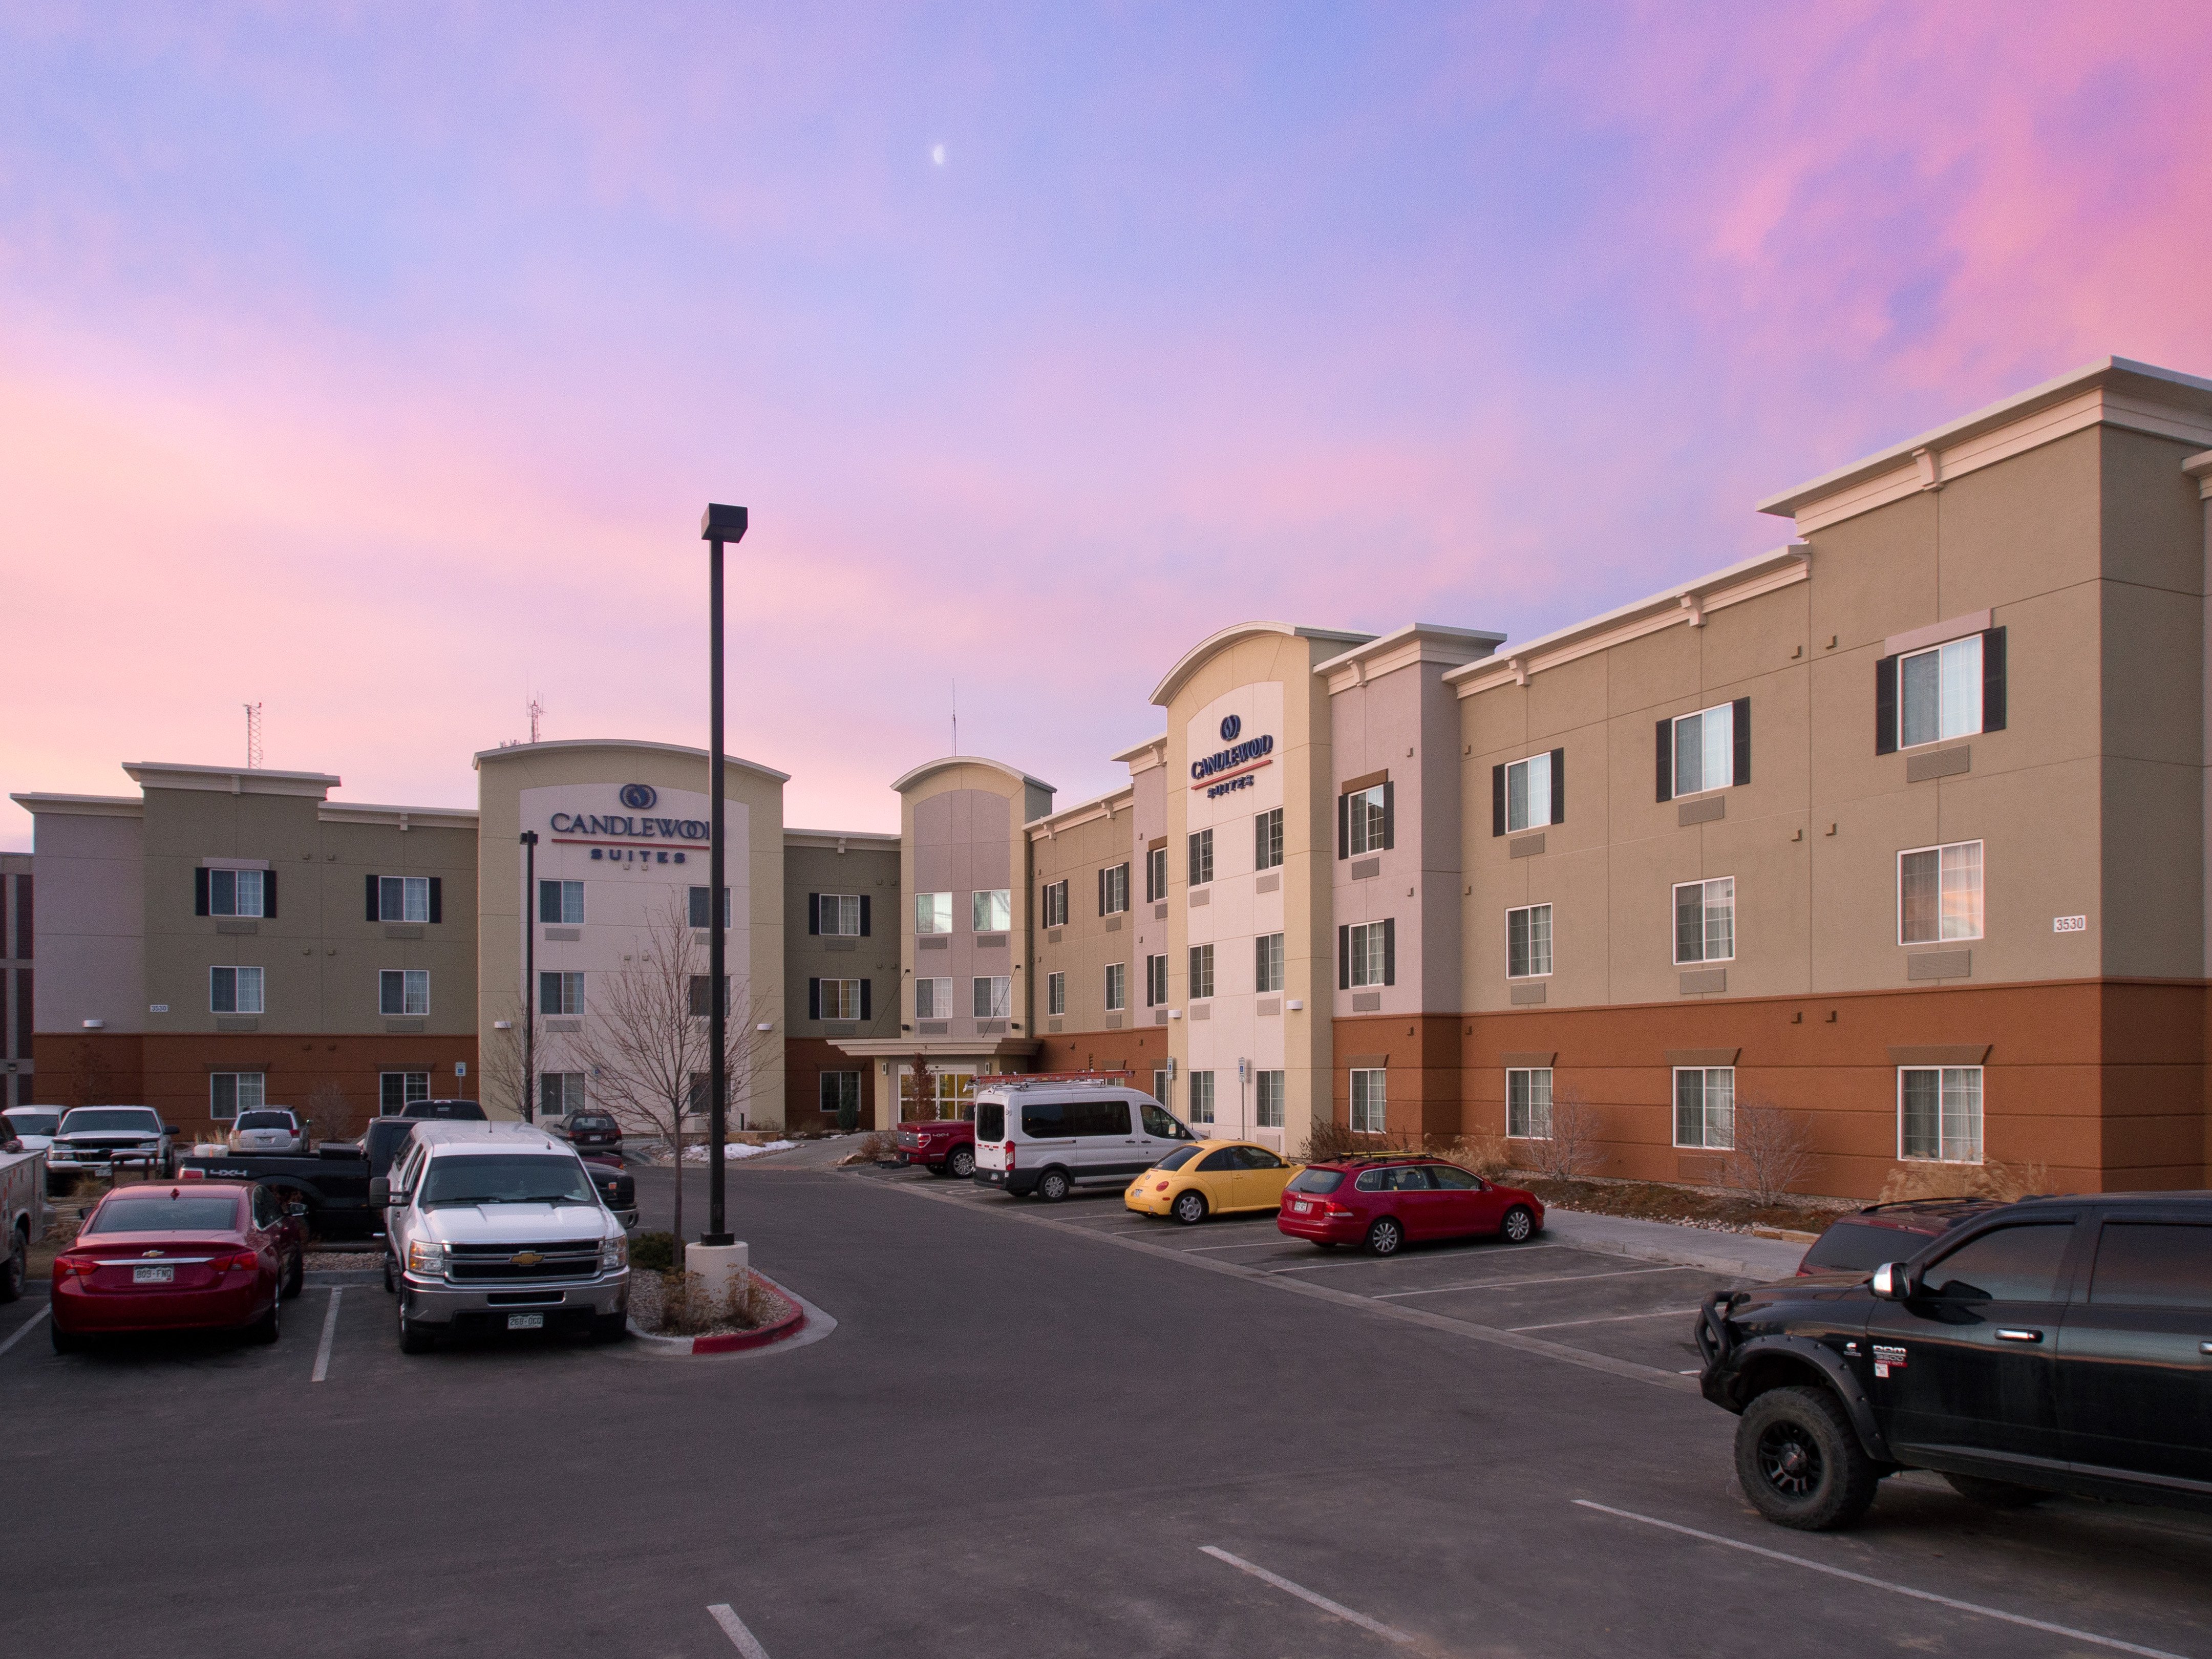 Candlewood Suties- Greeley's premium extended stay property